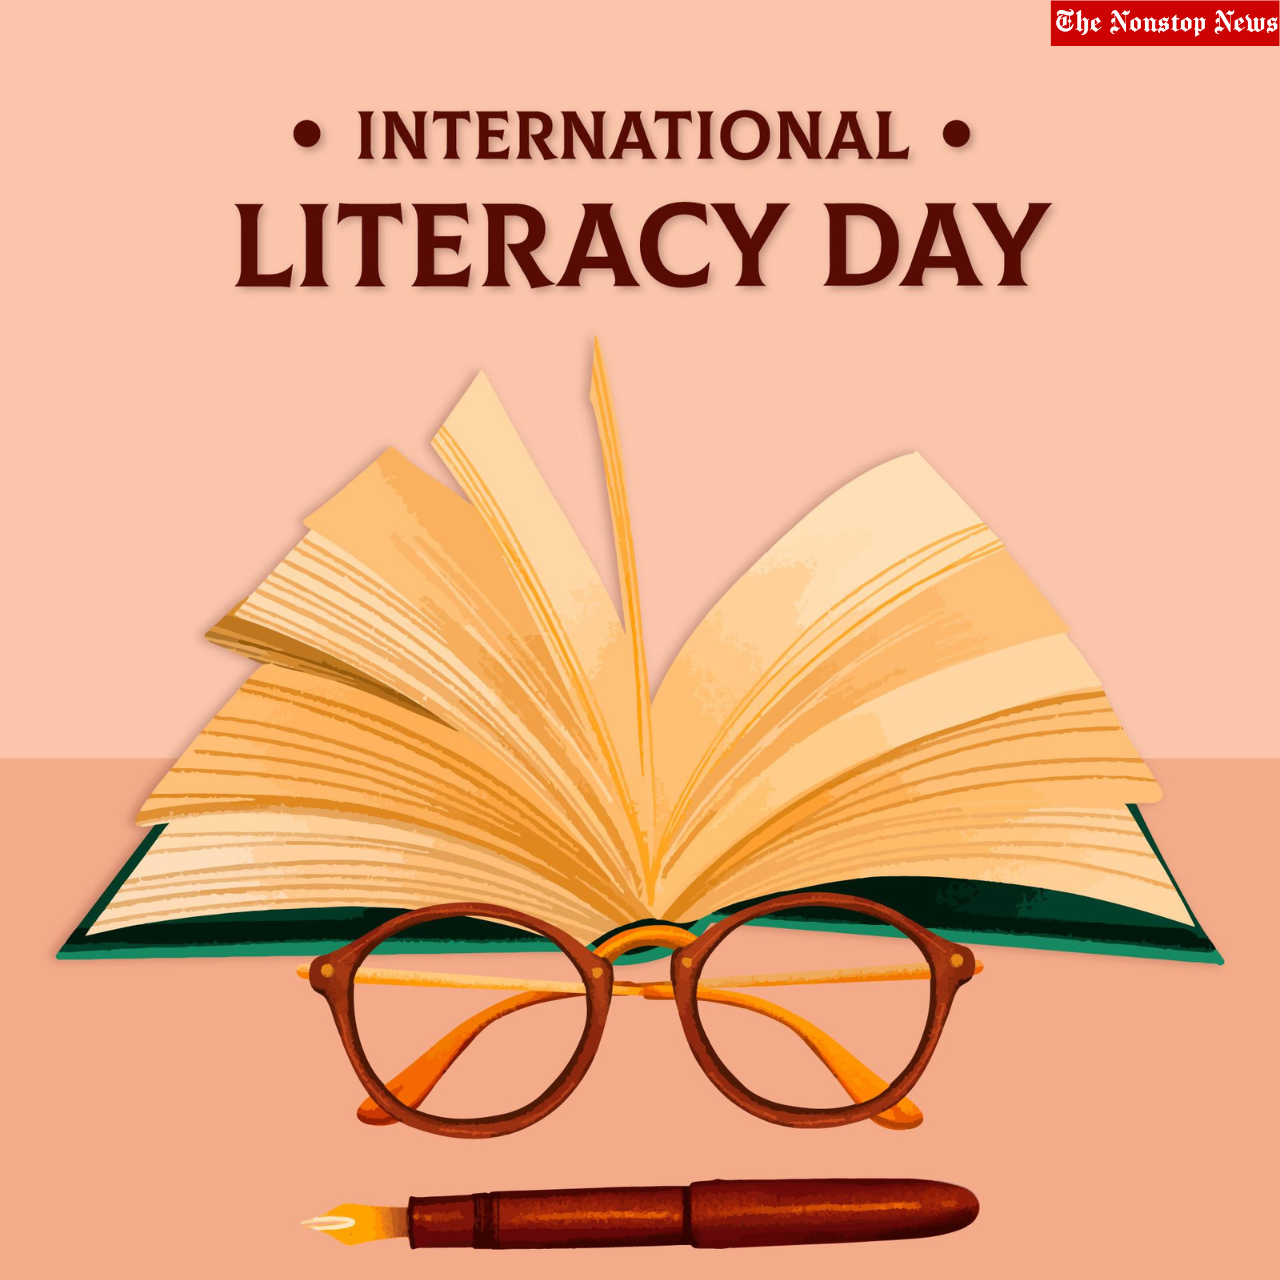 International Literacy Day 2022 Theme, Posters, Quotes, Images, Messages, Wishes, Greetings, Slogans and Instagram Captions to share